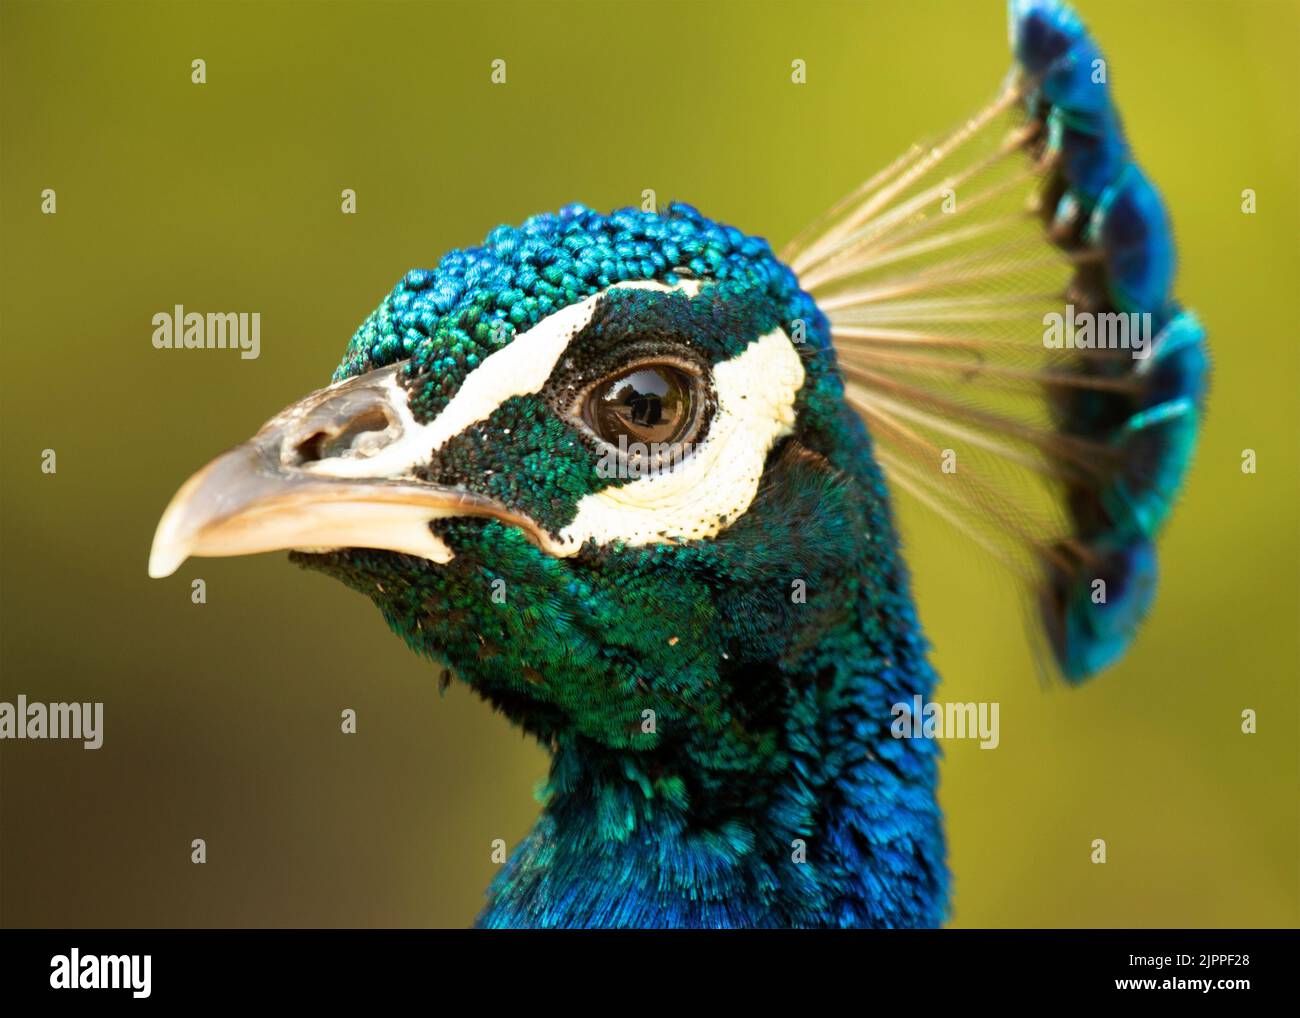 The brilliant plumage of a peacock. Stock Photo